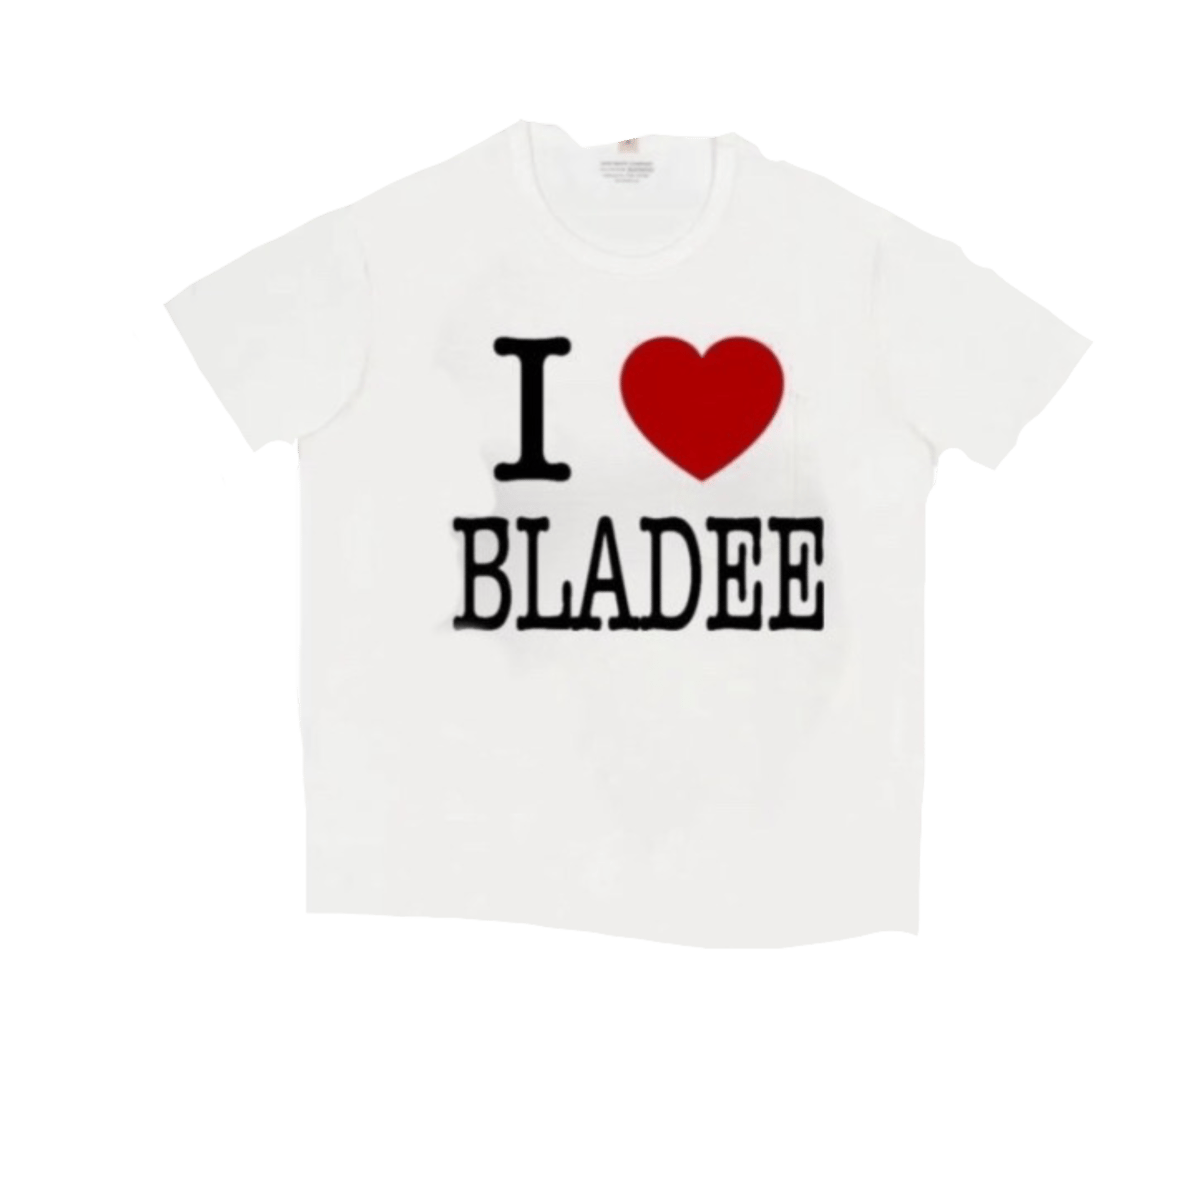 i-love-bladee-tee.png?auto=format&fit=max&h=1200&w=1200